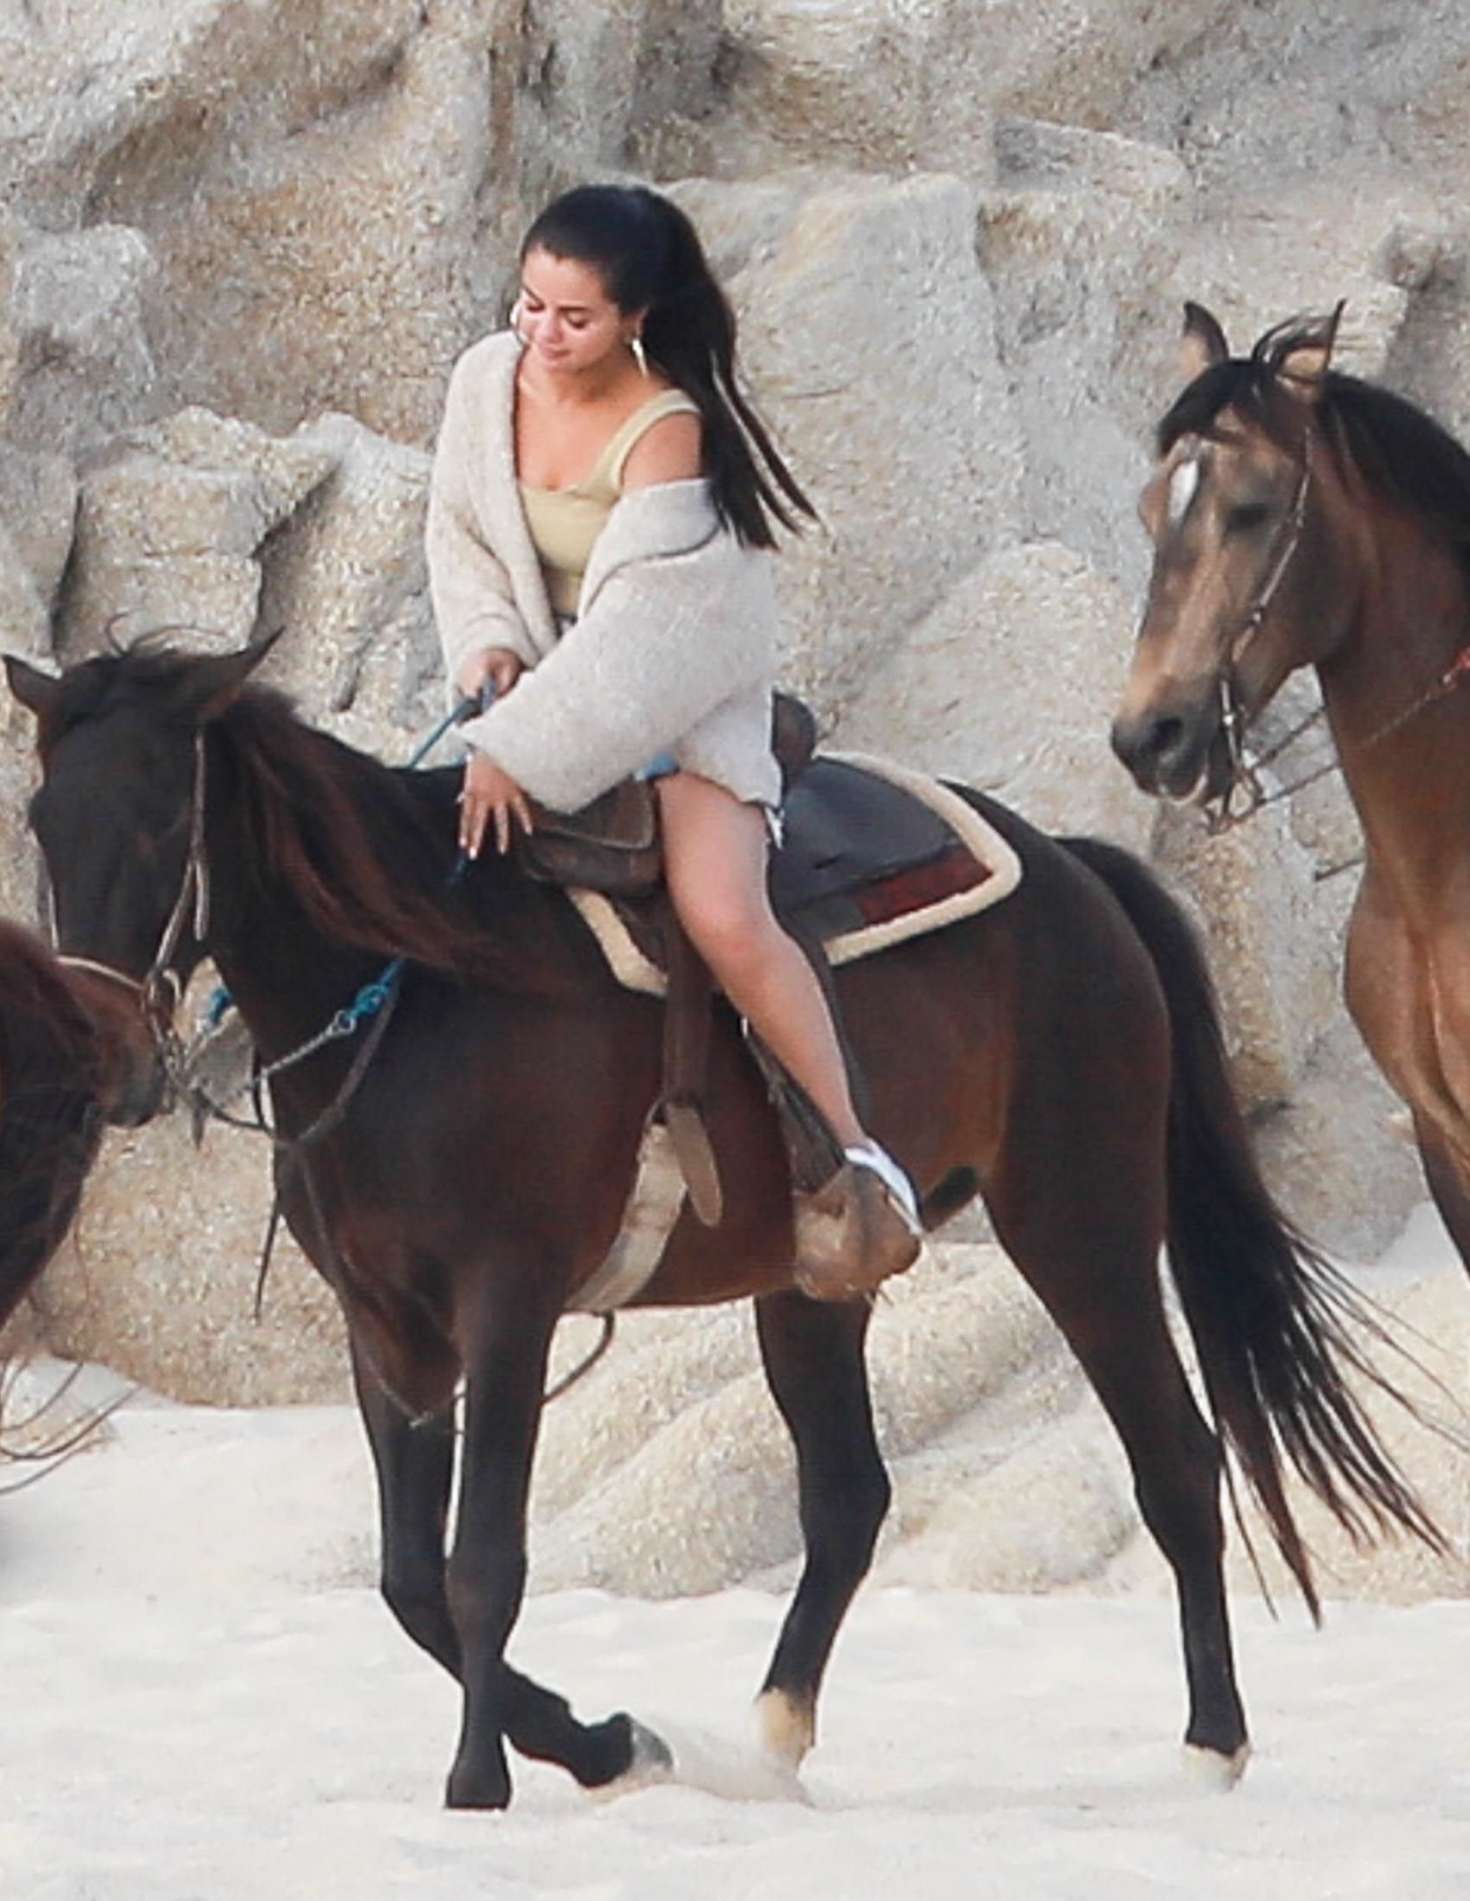 Selena Gomez â€“ Riding A Horse With Friends In Cabo San Lucas